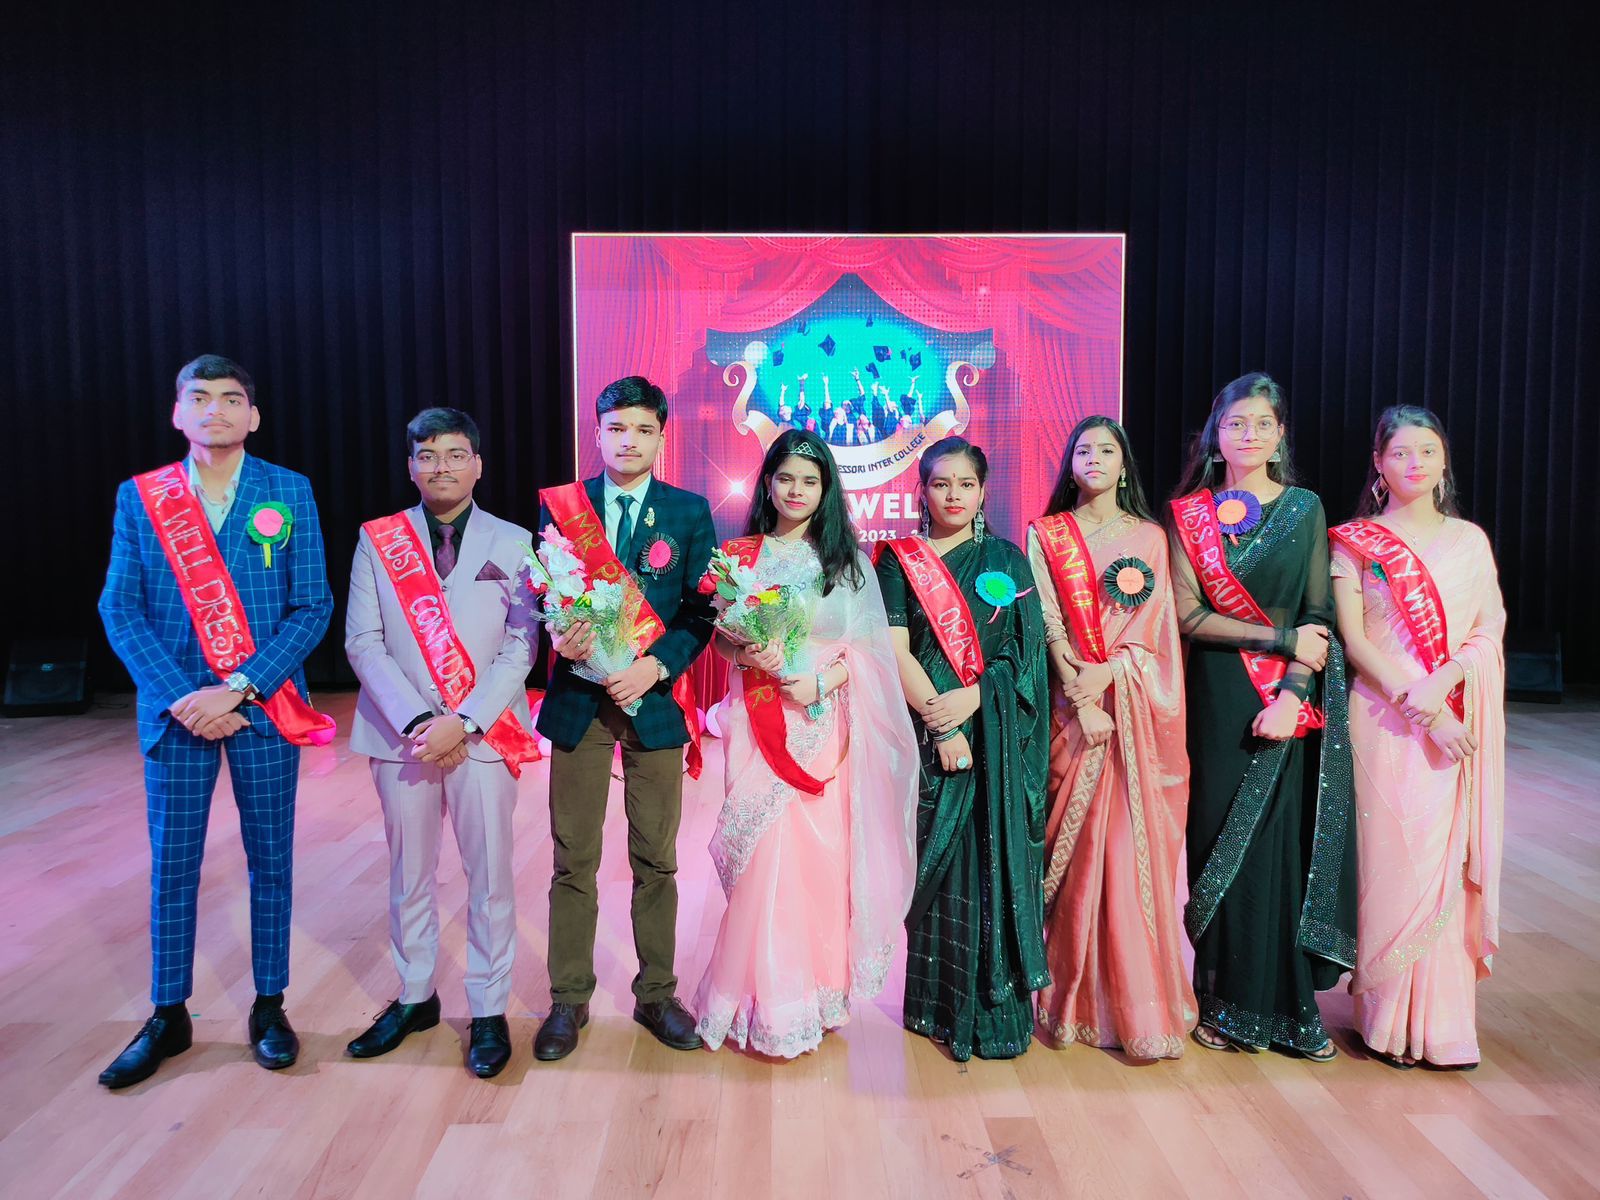 Shambhavi Shukla and Arya Tripathi were selected for “Miss Pioneer” and “Mr. Pioneer” respectively.